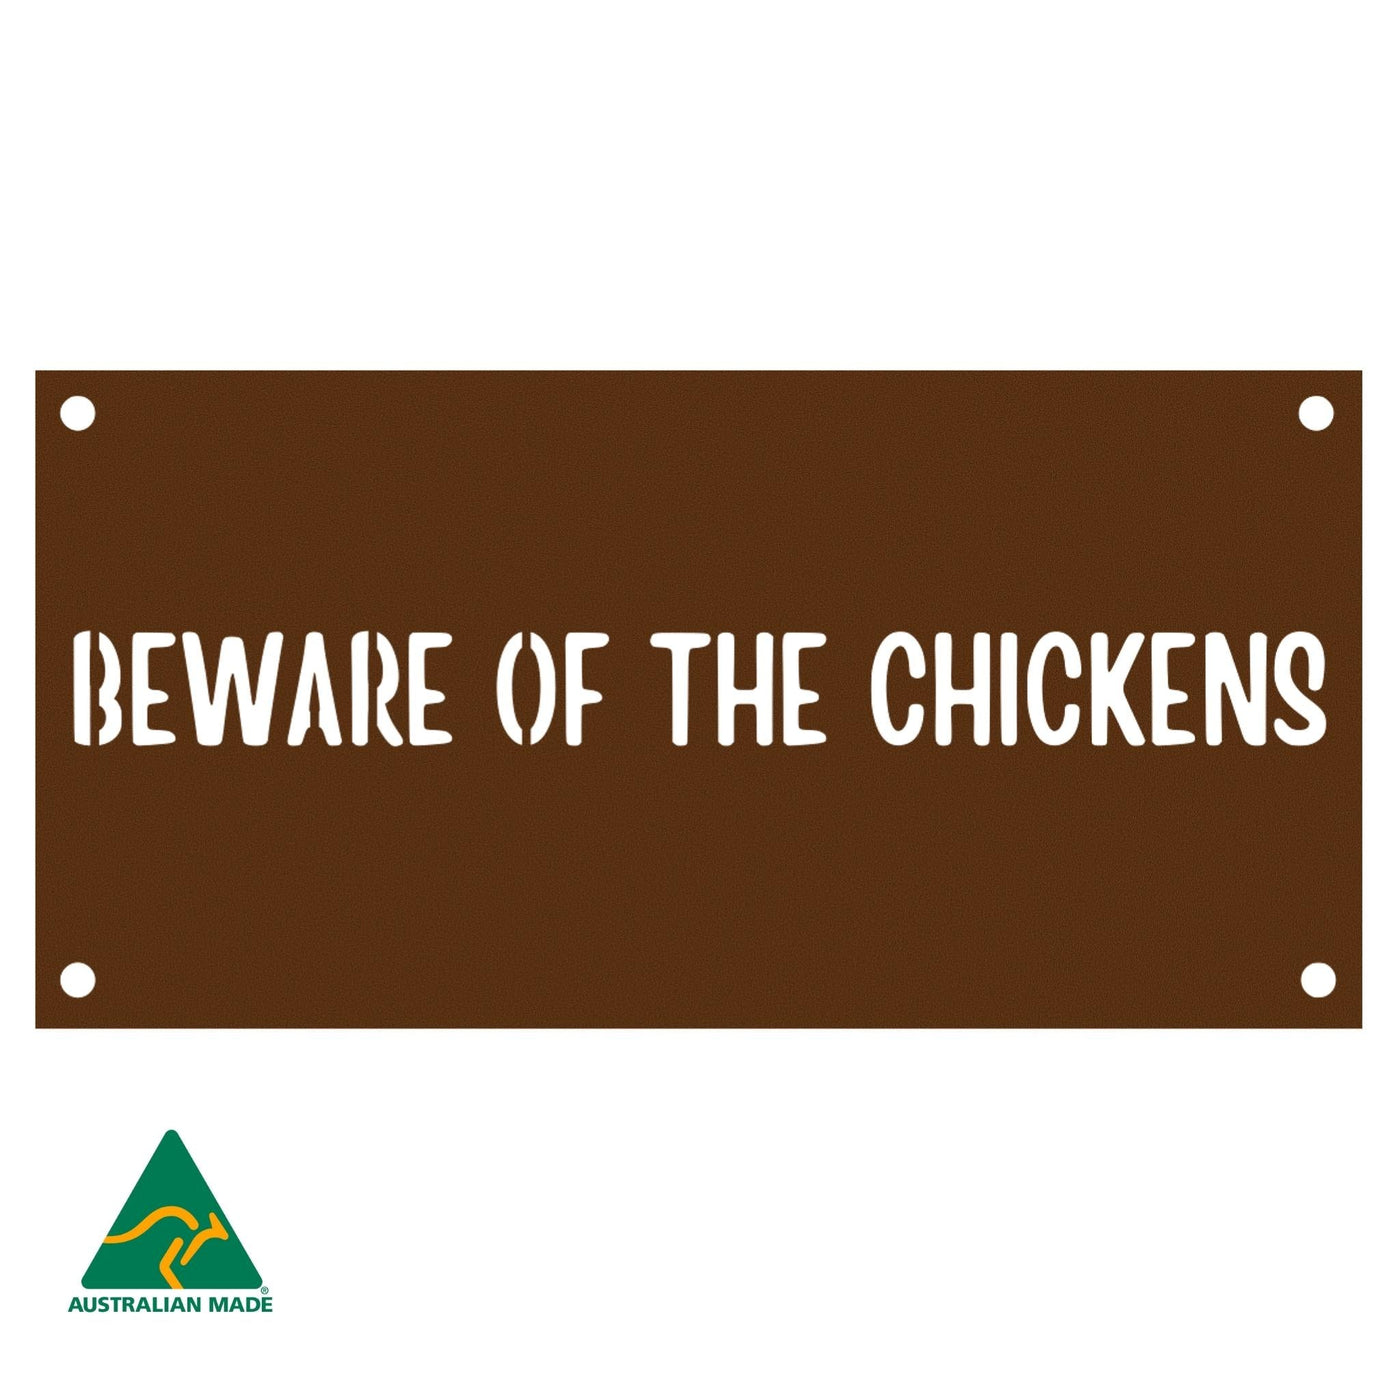 Beware of the Chickens Wall Sign | Rust Finish